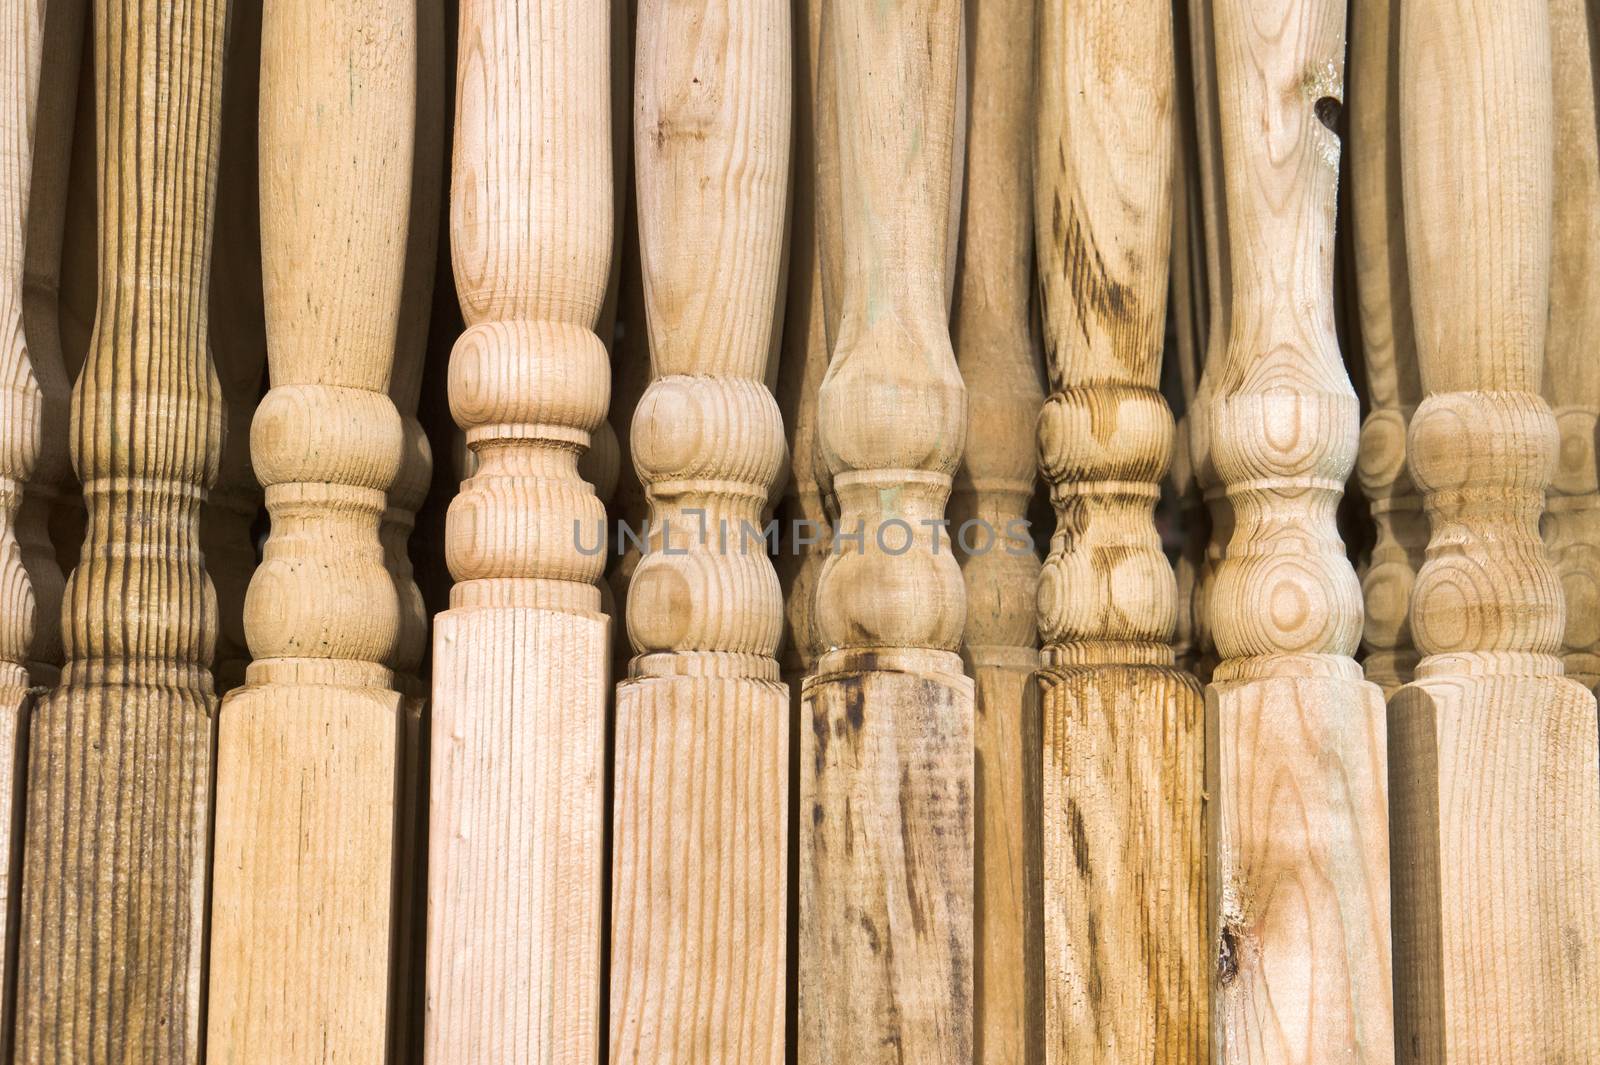 Wooden posts as a background image